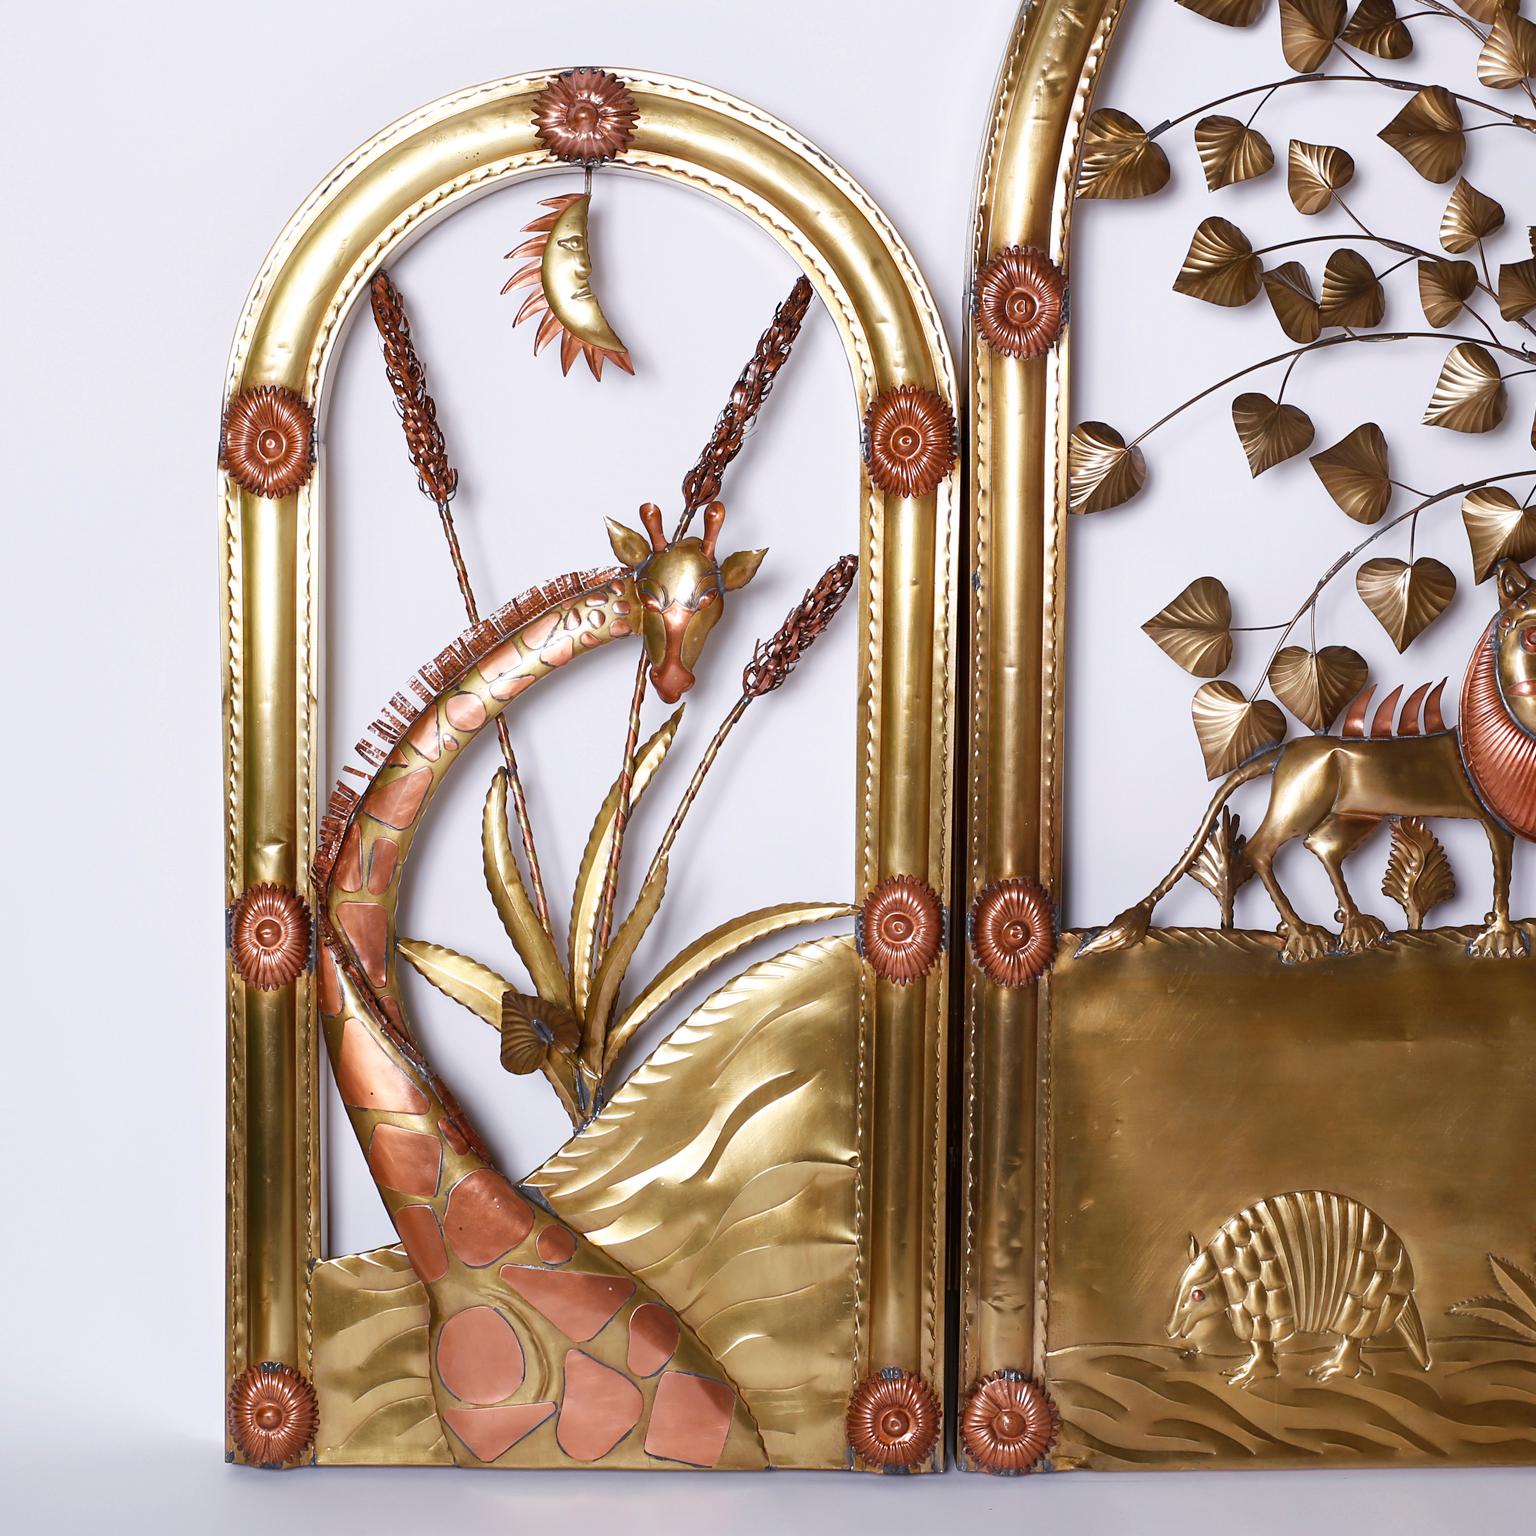 Midcentury Bustamante tree of life sculpture ambitiously handcrafted in brass and copper with a brave and amusing perspective depicting animals, plants, and insects in harmony with nature. Signed Sergio Bustamante and hand polished and lacquered for